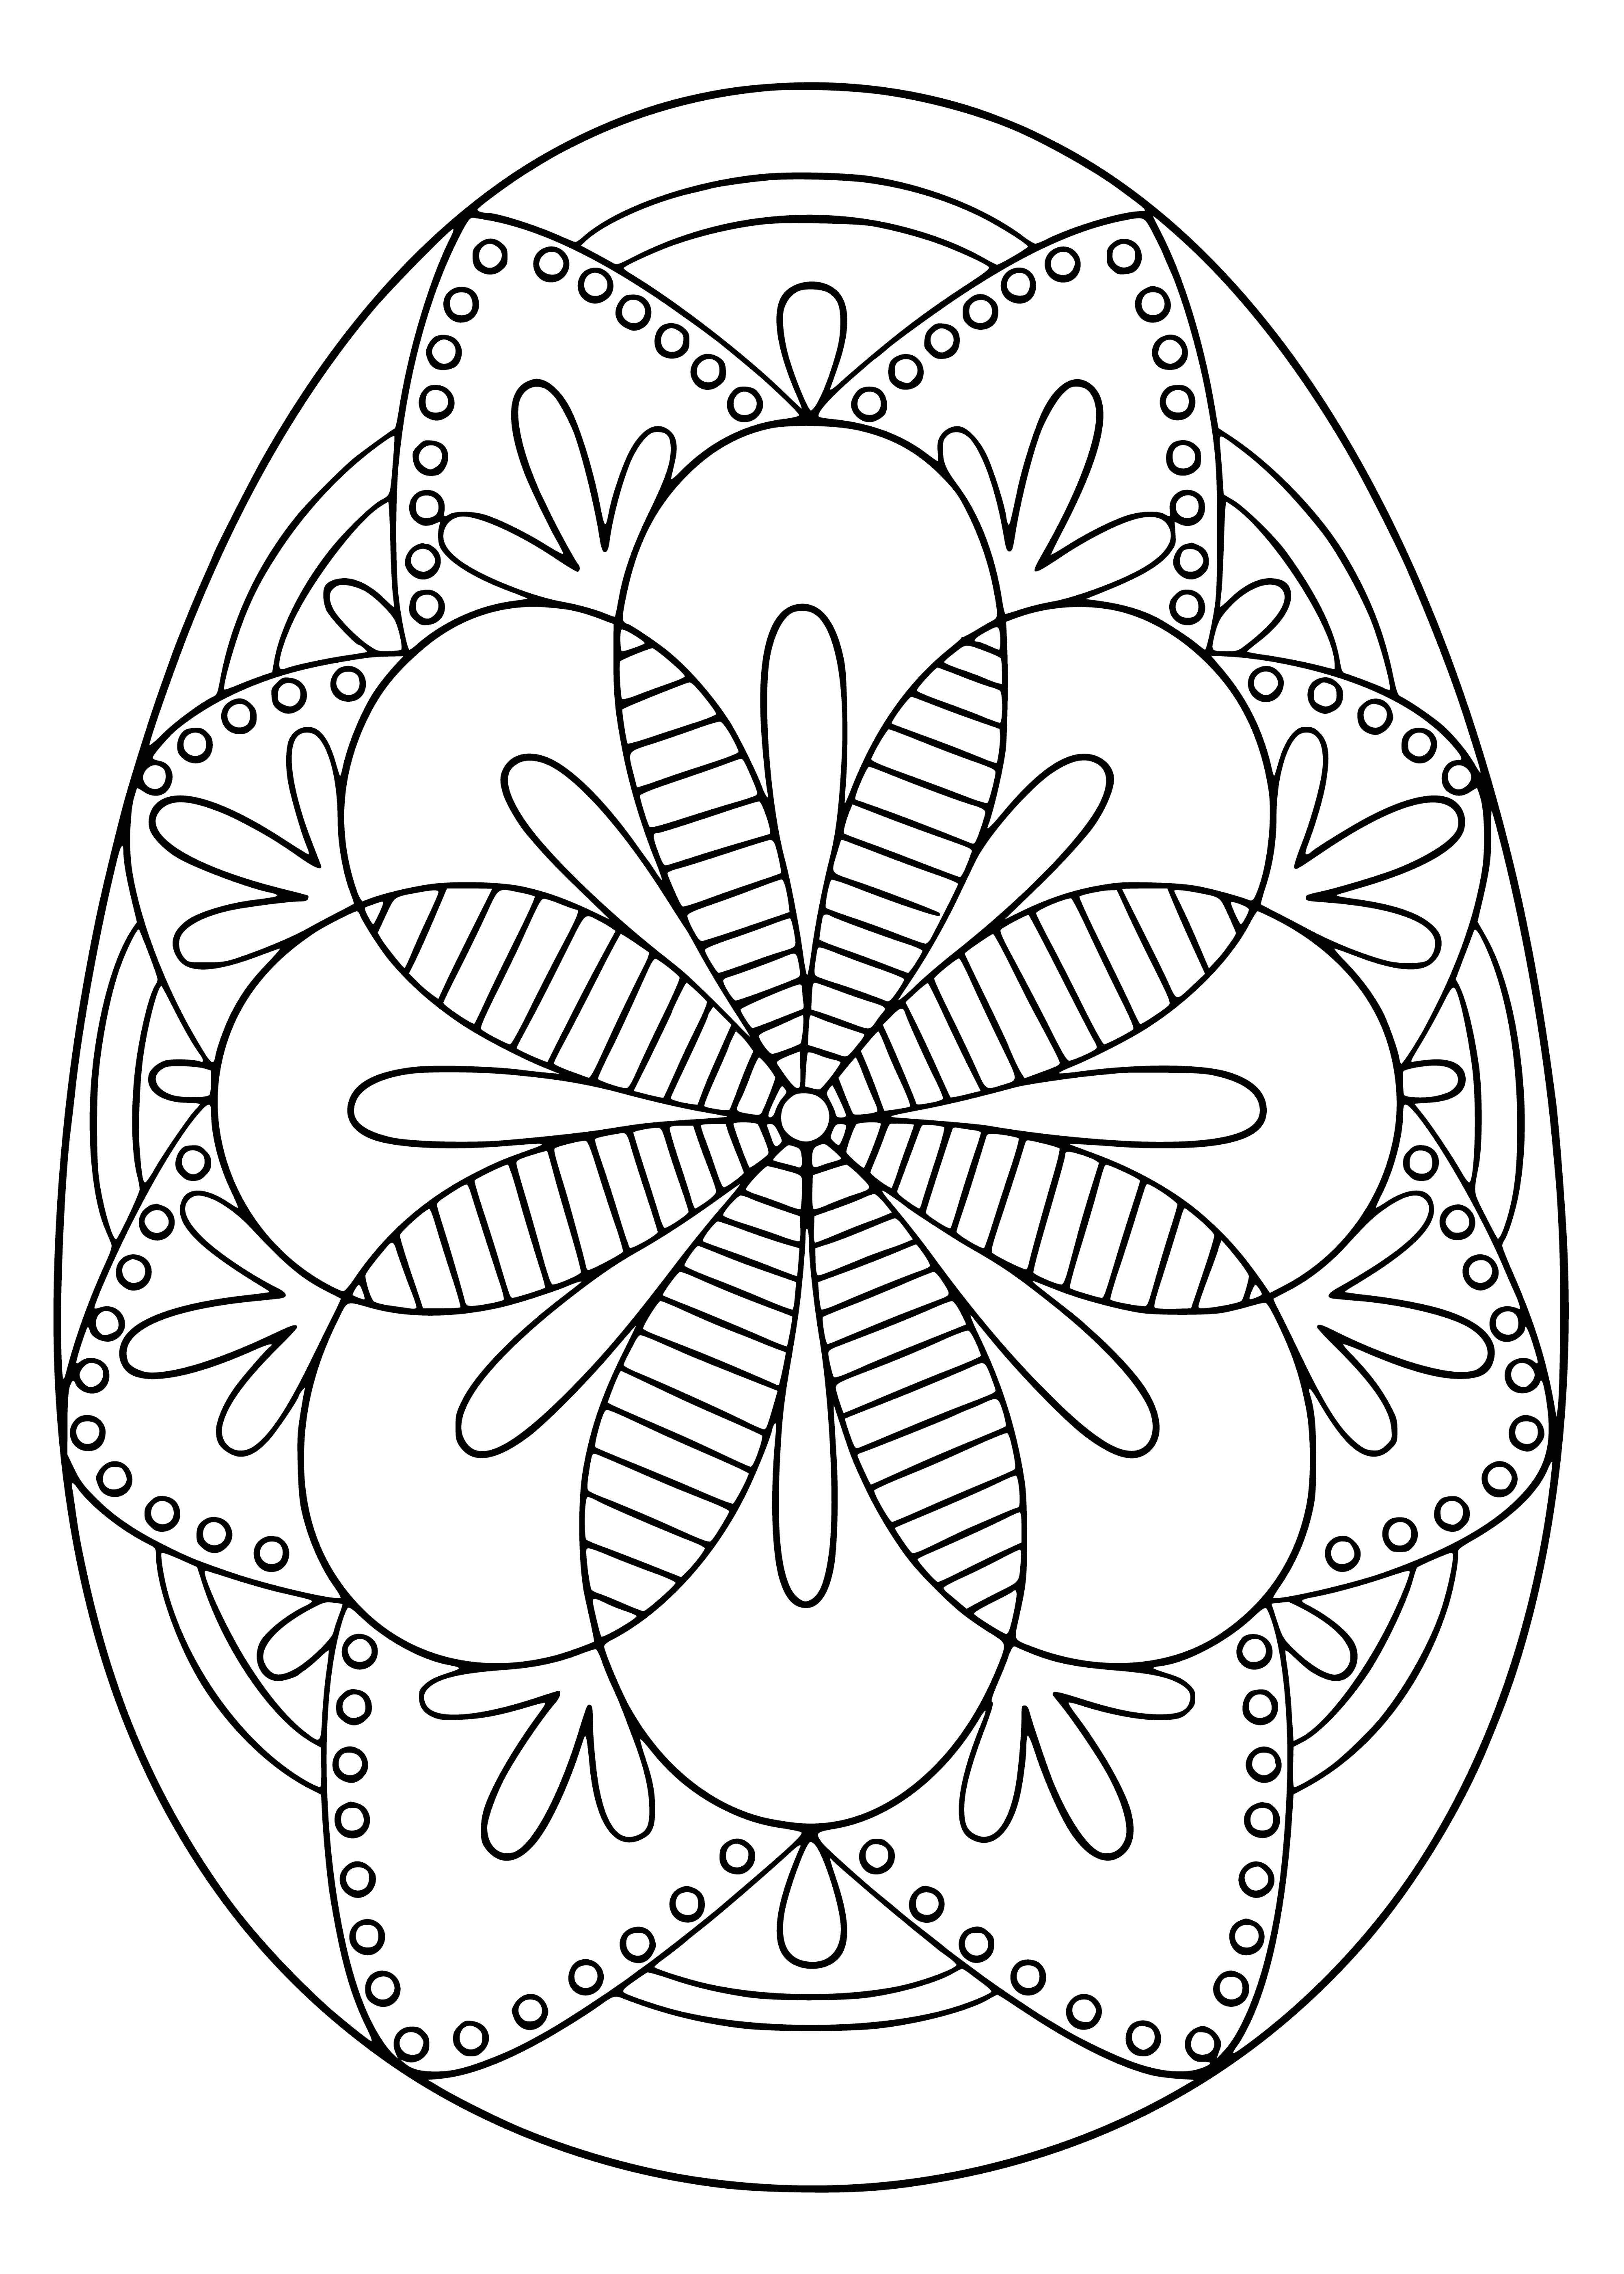 coloring page: Intricate brown Easter egg sits on green/brown background, featuring flowers, leaves, and branches.